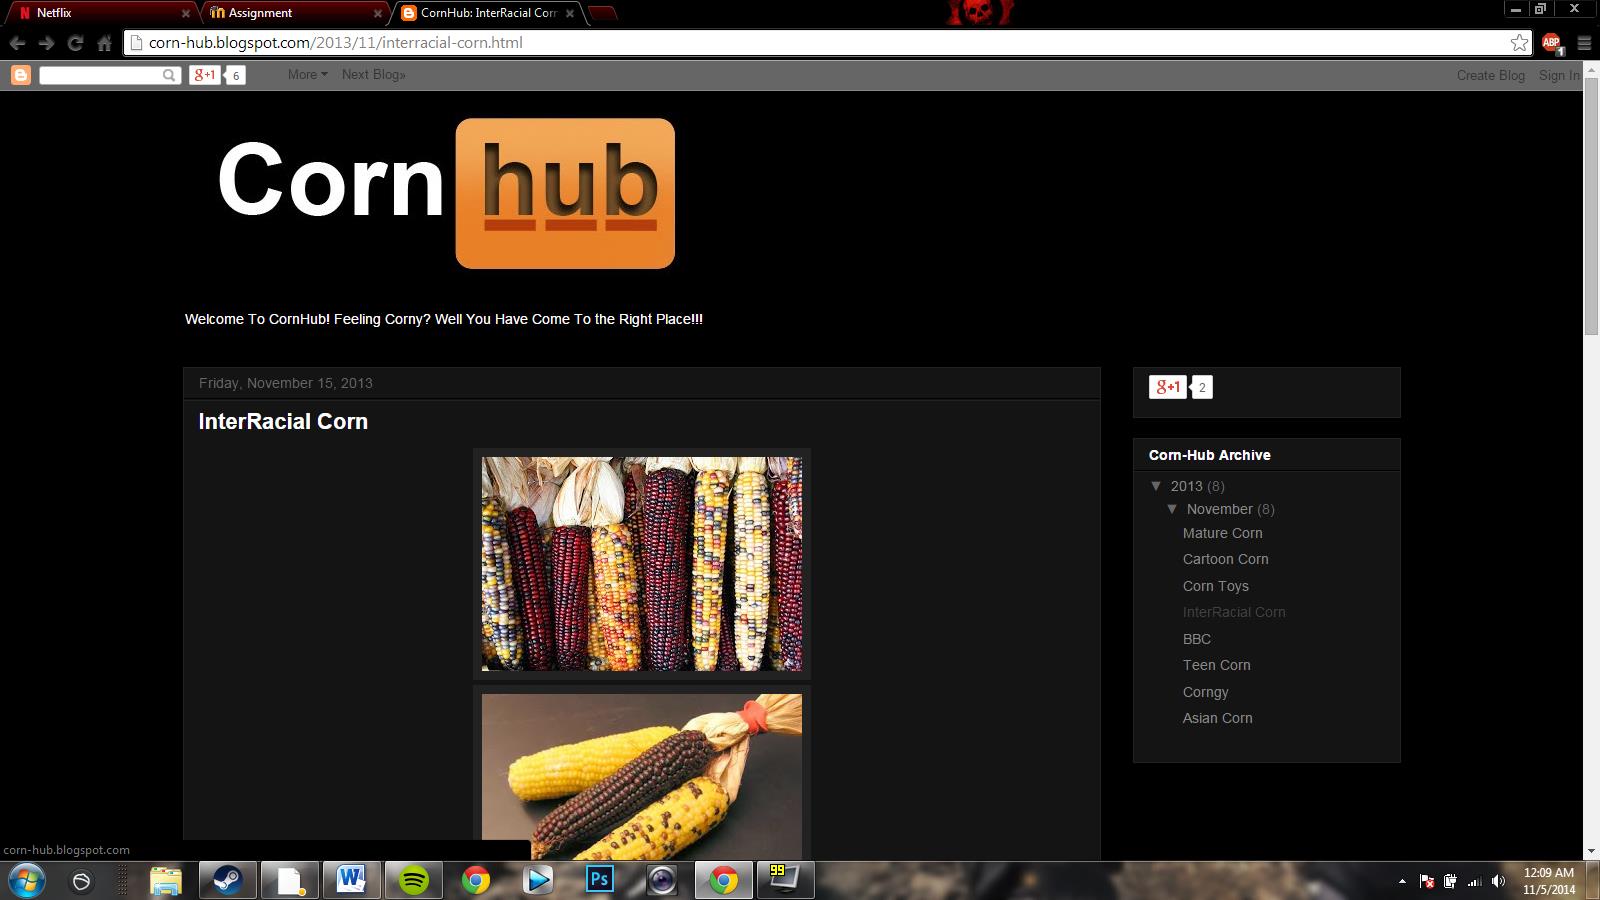 Yeah... So there's a website called CornHub. You feeling Corny?